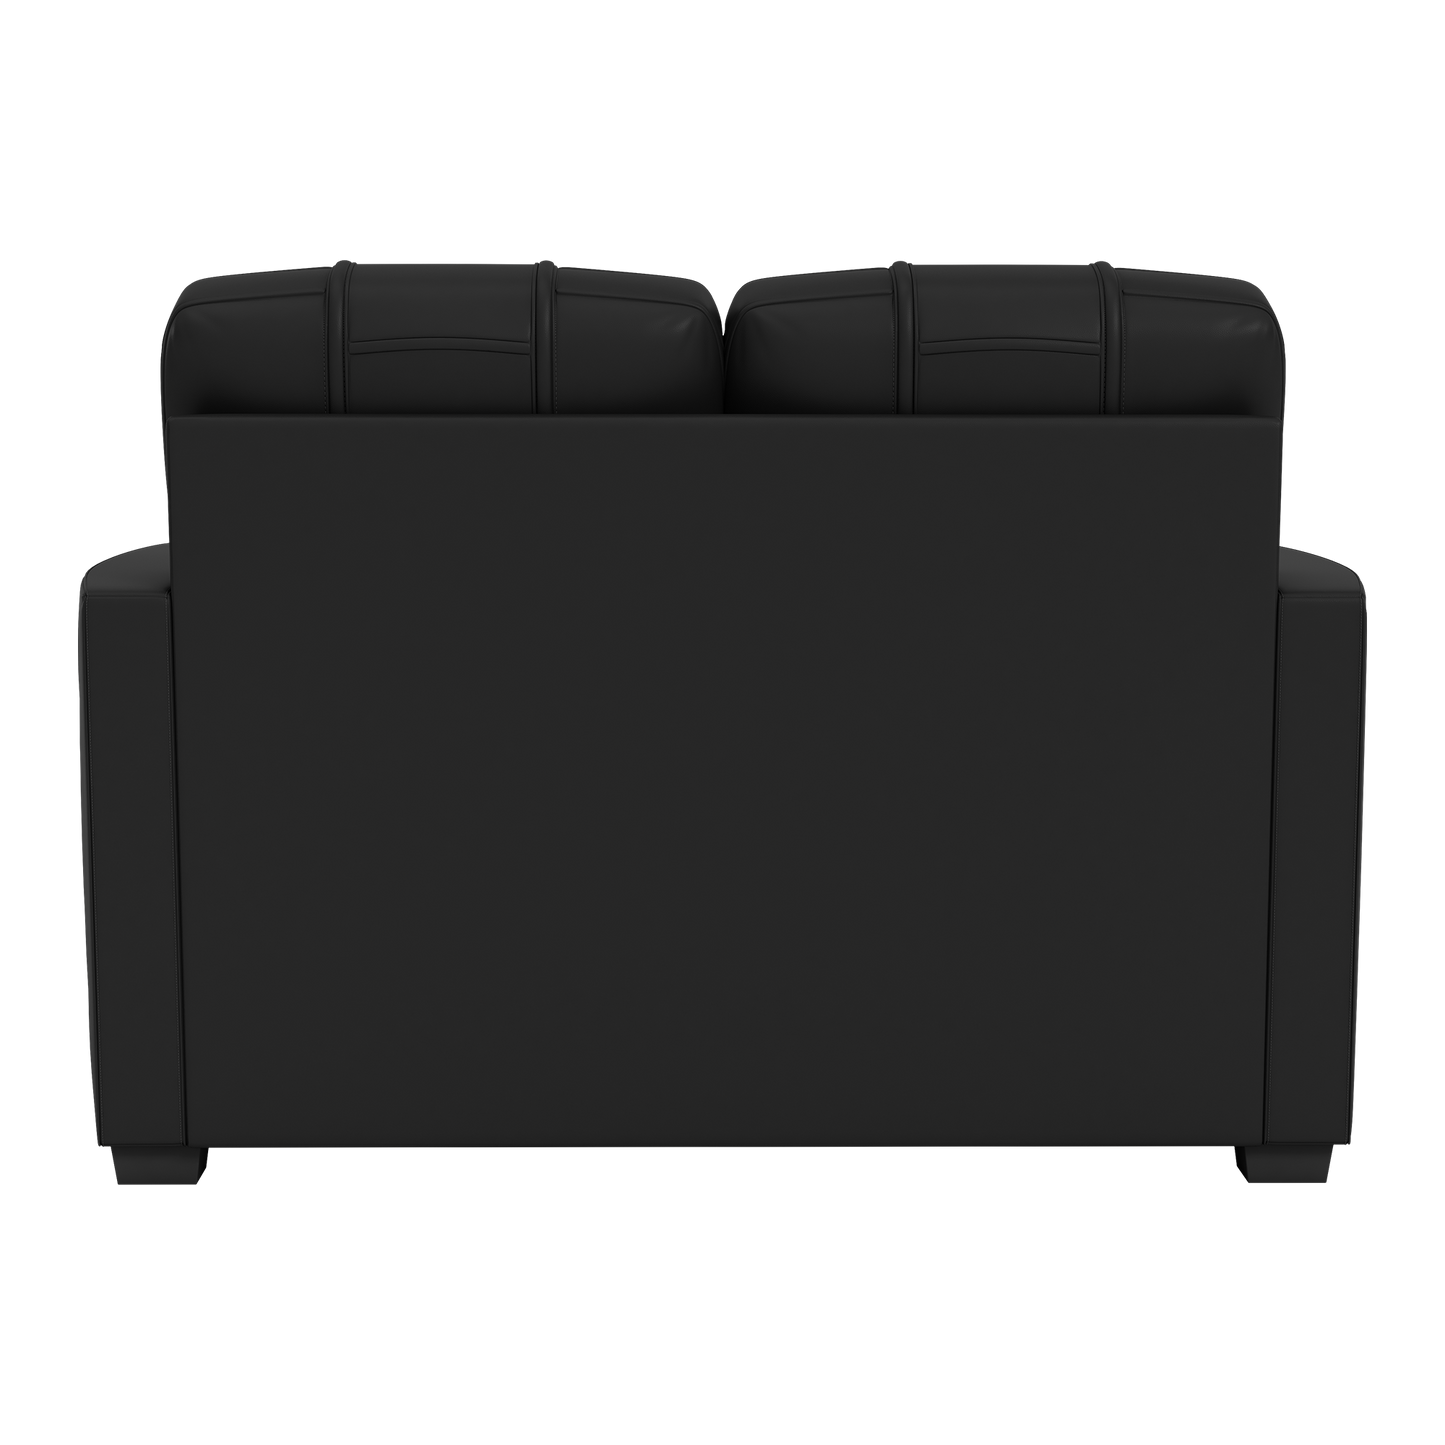 Silver Loveseat with World's Greatest Dad Logo Panel